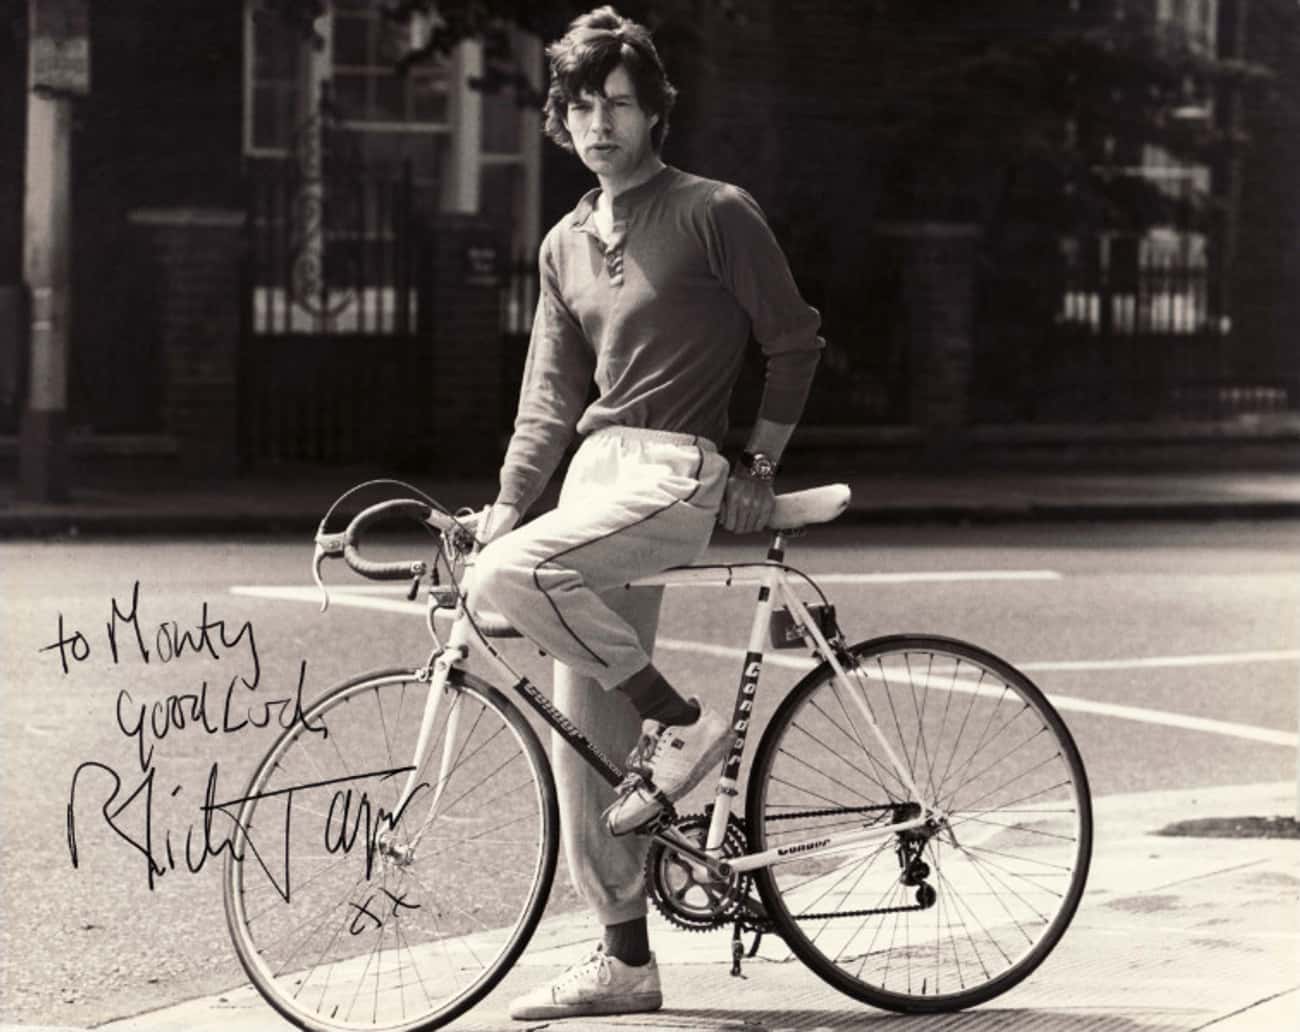 Young Mick Jagger On A Bicycle Photo U1?fit=crop&fm=pjpg&q=60&w=650&dpr=2